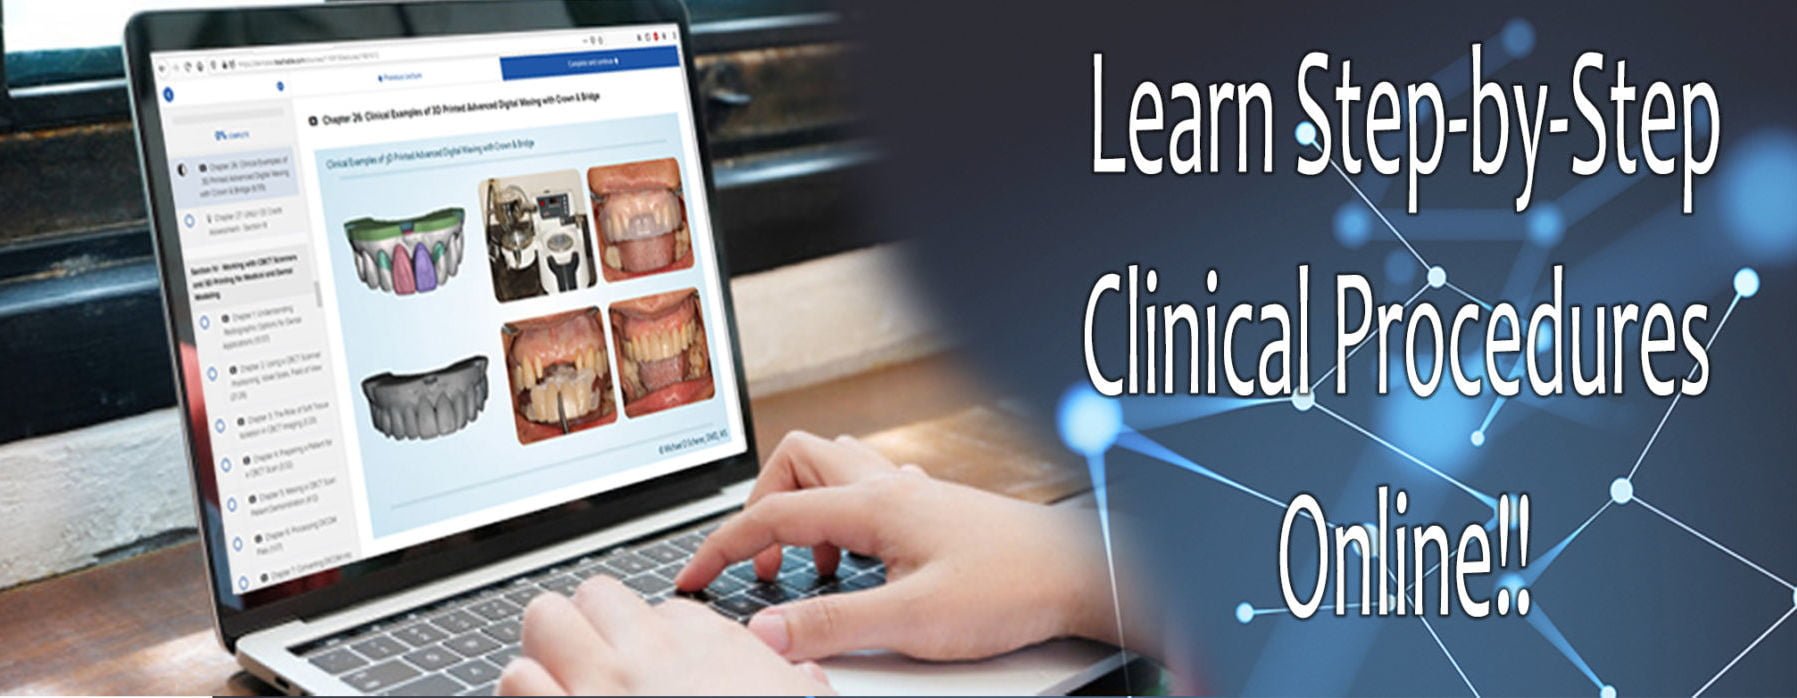 Learn Step-by-Step Clinical Procedures Online